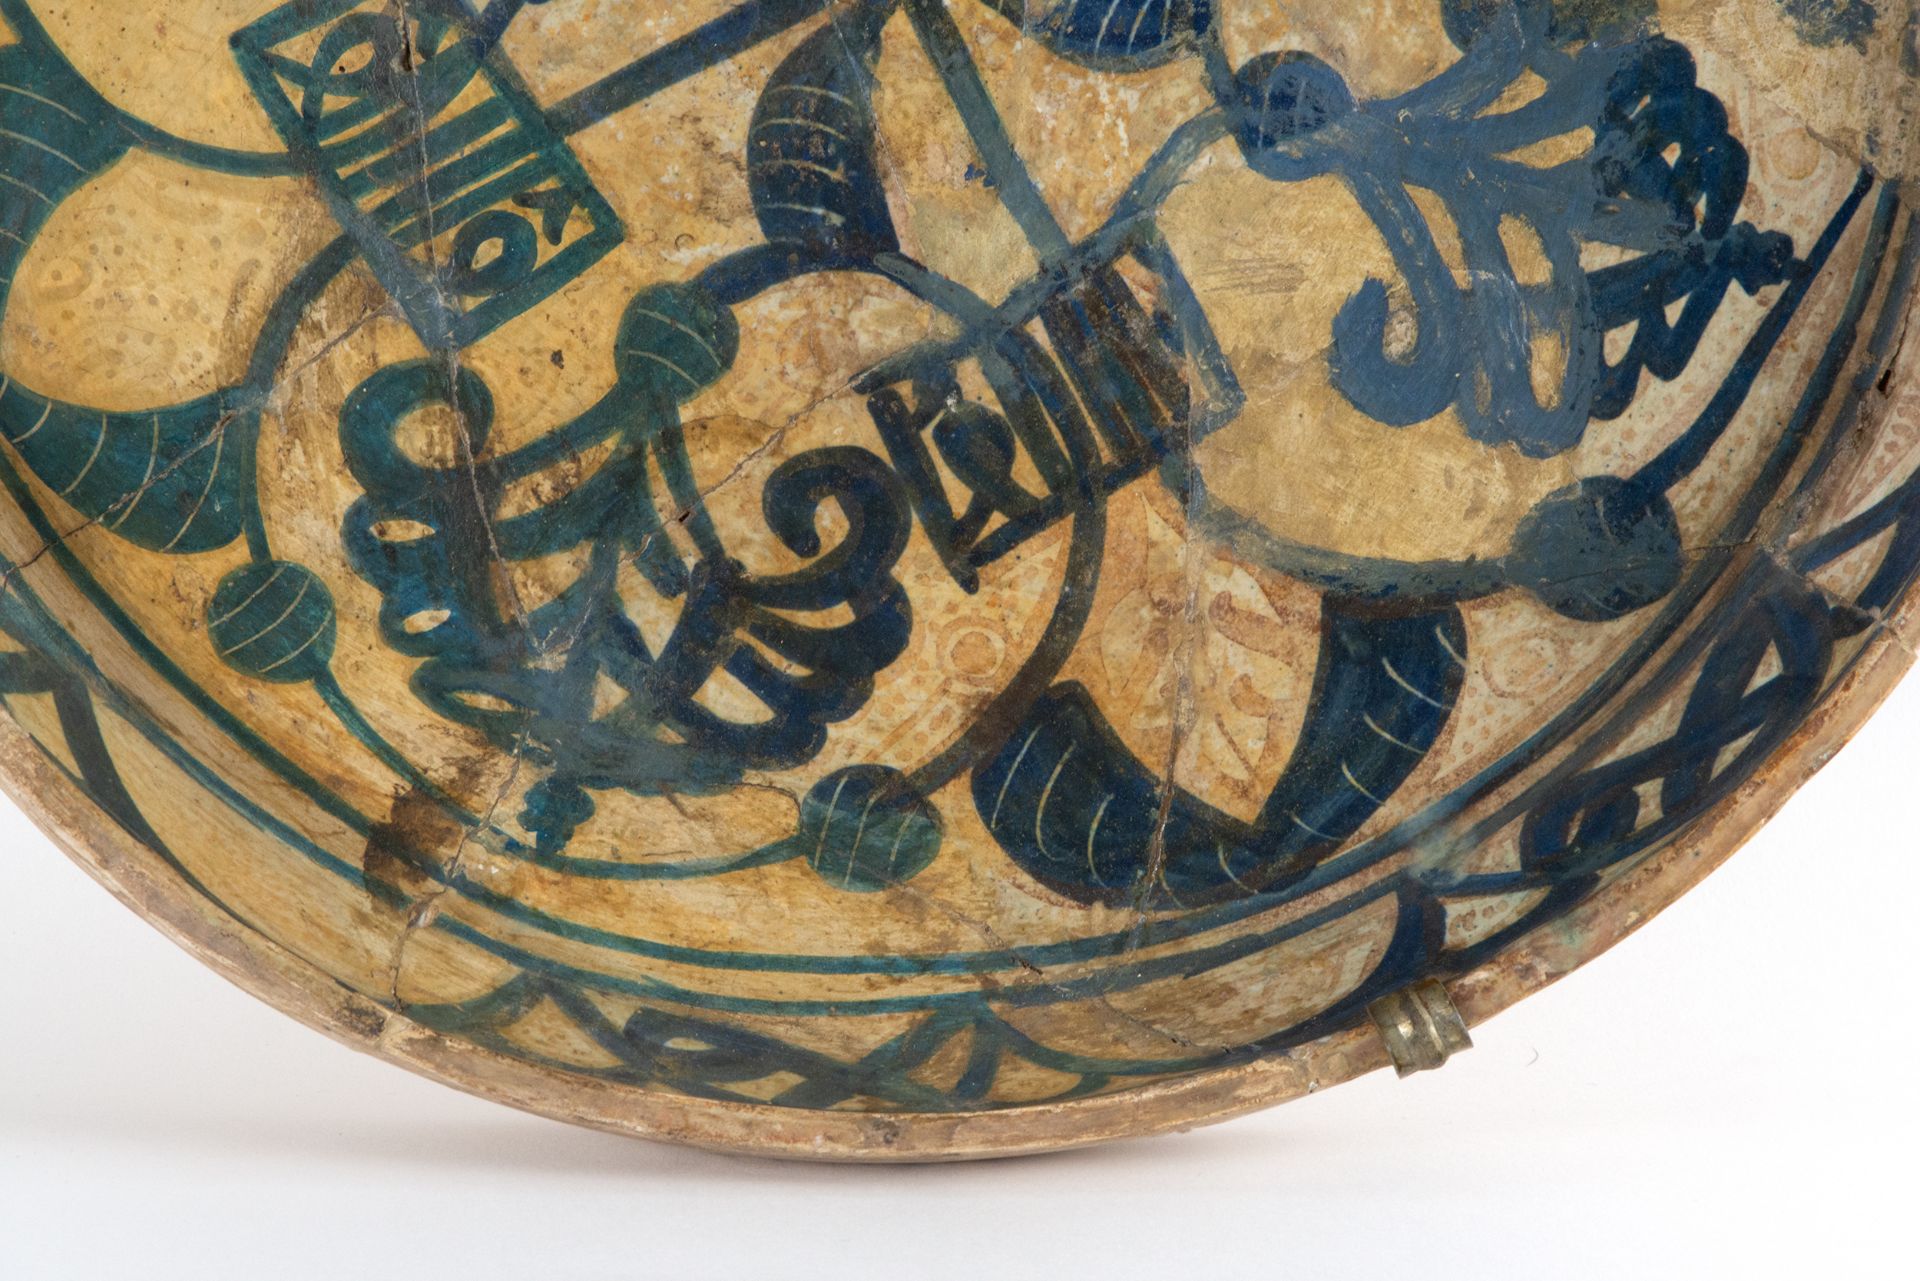 Plate in blue enamel and reflections of Hispano-Arab copper, 15th - 16th centuries - Image 4 of 6